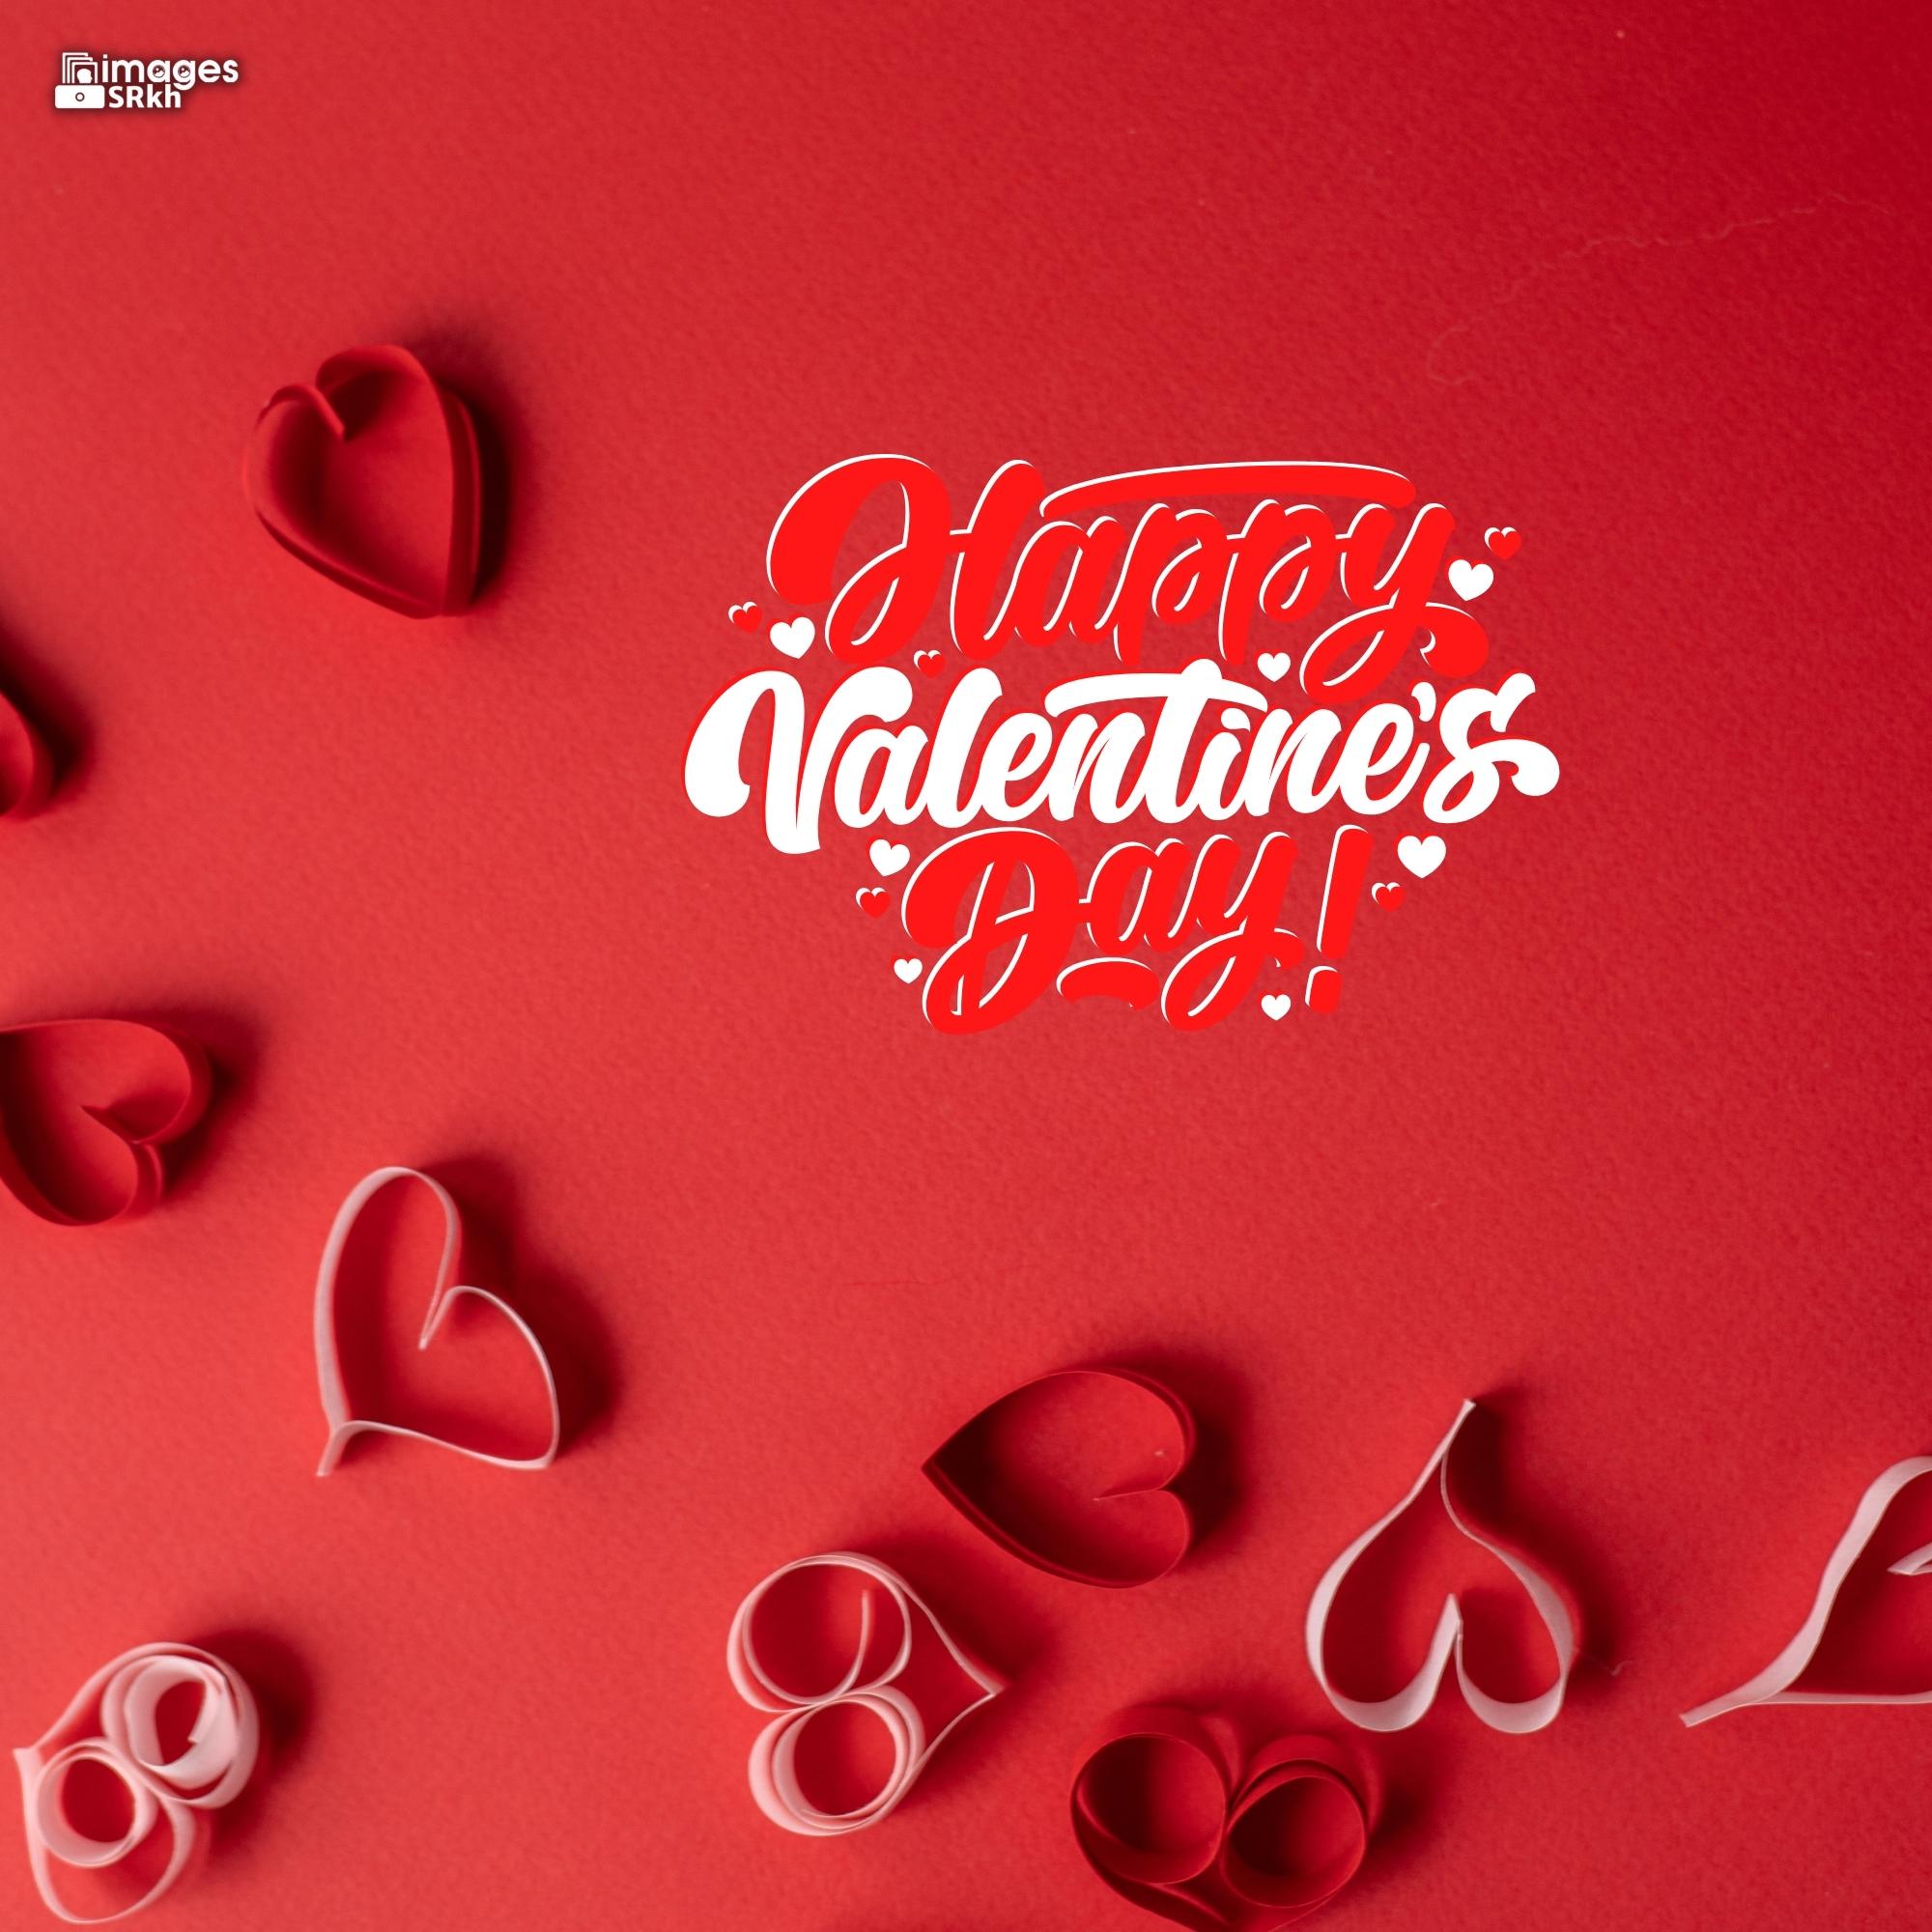 Happy Valentines Day | 544 | PREMIUM IMAGES | Wishes for Love